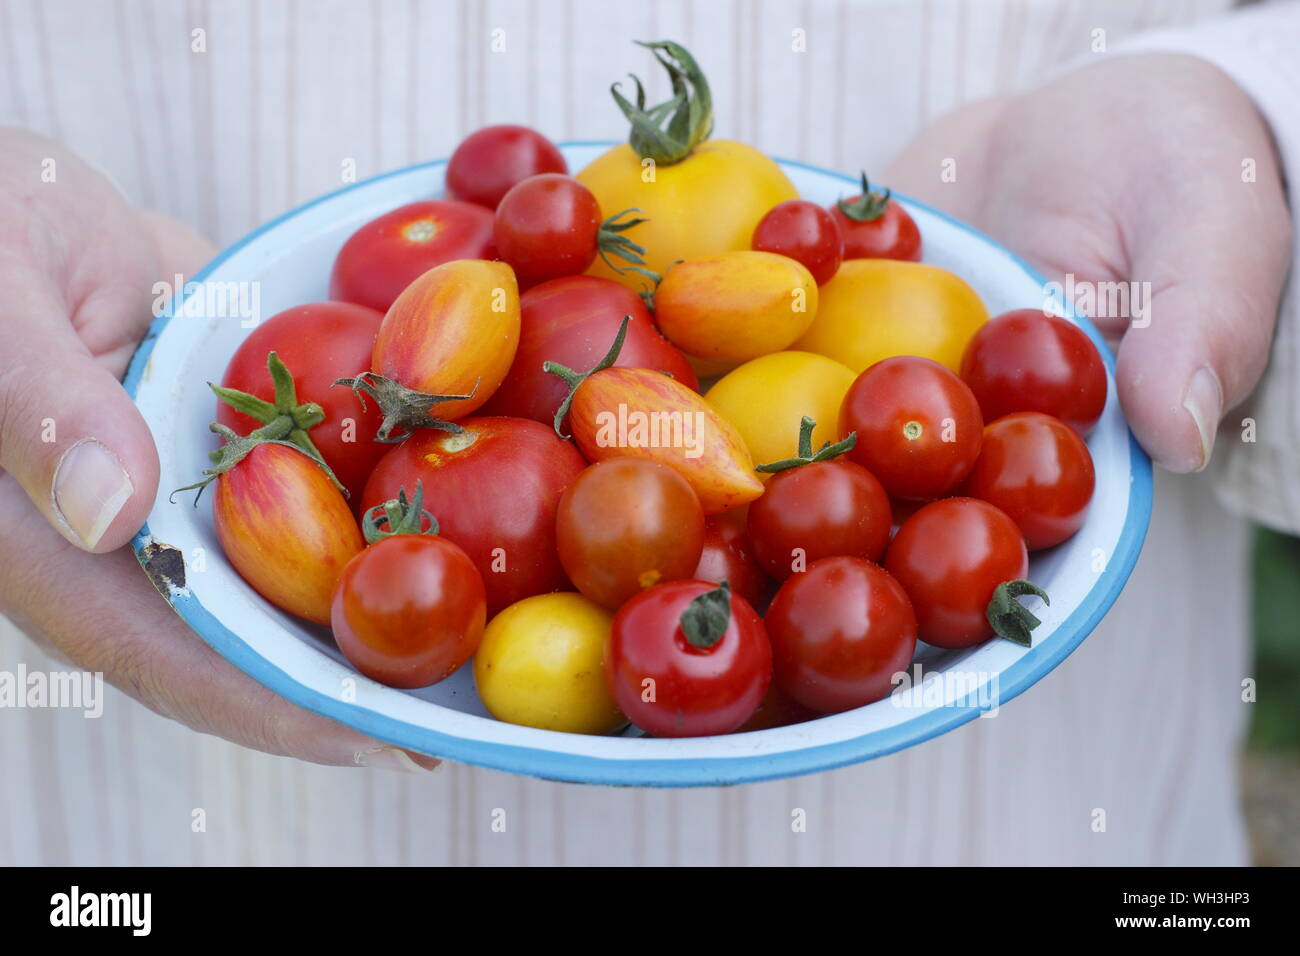 Solanum lycopersicum. Freshly picked homegrown tomatoes on a plate in a UK garden - Golden sunrise, Sweet Million and Tumbling Tom. Stock Photo